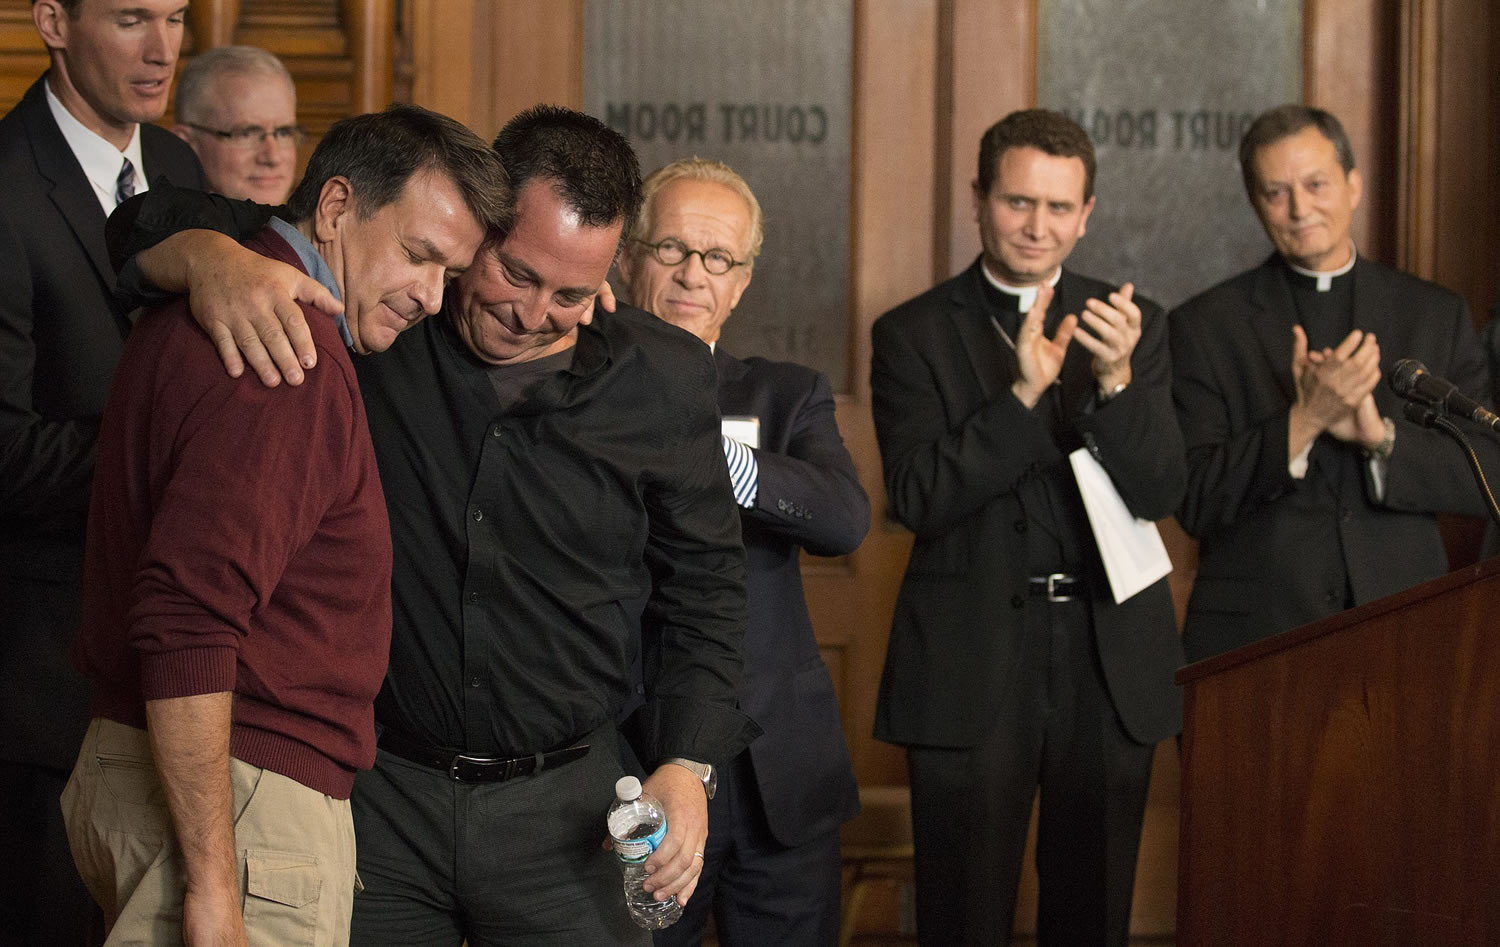 Abuse survivors Al Michaud, left, and Jim Keenan embrace after they both spoke of the importance of this historic agreement as attorney Jeff Anderson, Bishop Andrew Cozzens and Vicar General Rev. Charles Lachowitzer at right look on in St. Paul, Minn., Monday, Oct. 13, 2014. A Minnesota judge signed off on a settlement in a groundbreaking case that accused Catholic church leaders in Minnesota of creating a public nuisance by failing to warn parishioners about an abusive priest.